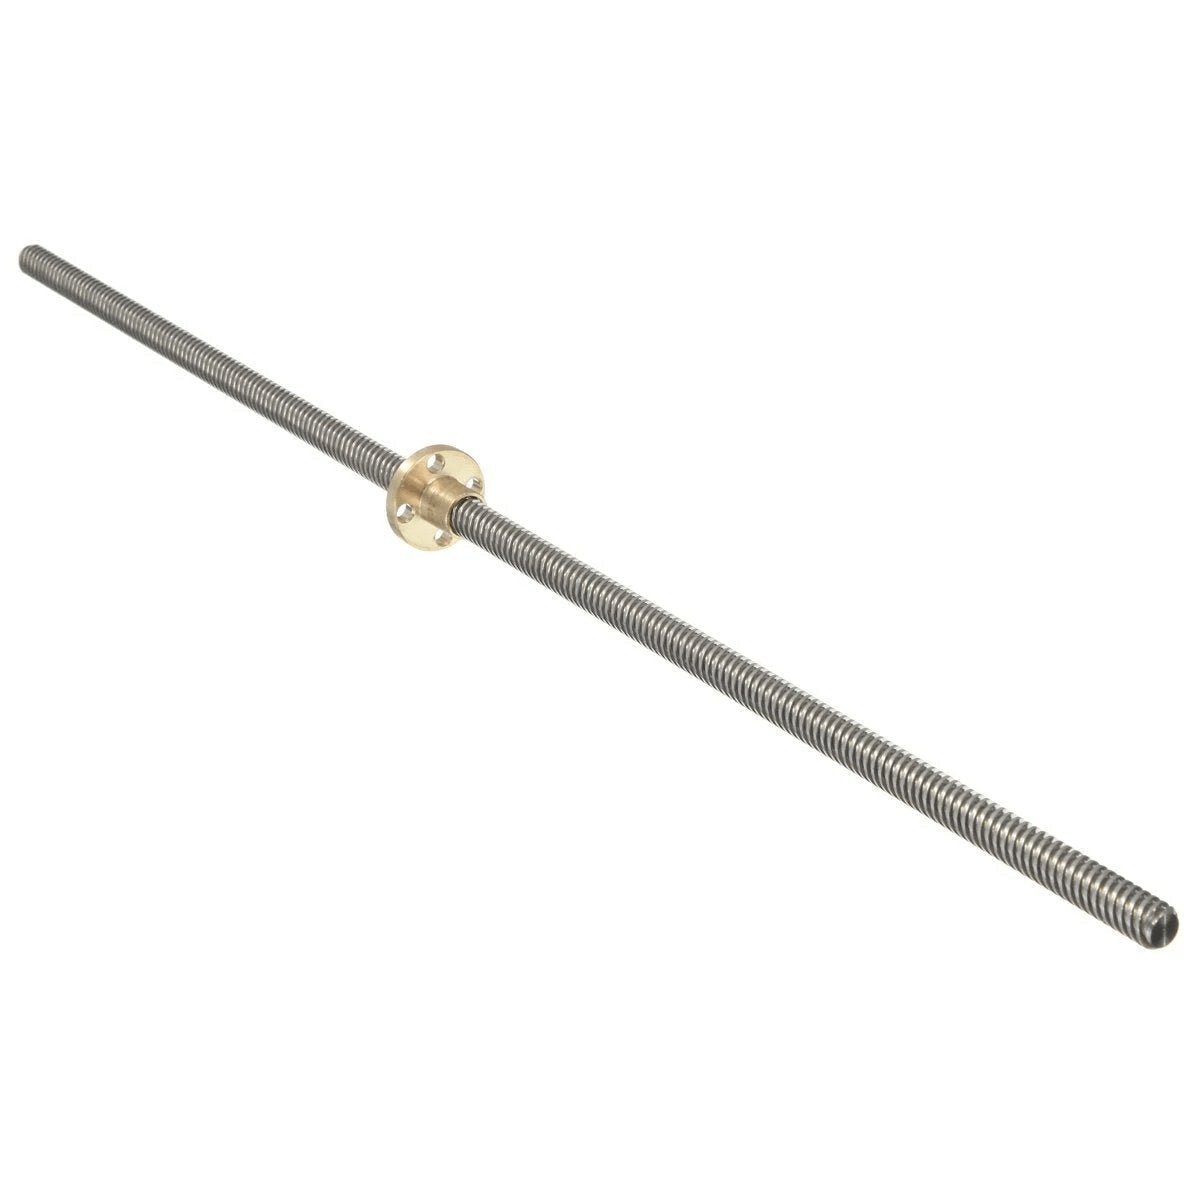 300mm Z-Axis Stainless Steel Threaded Rod Lead Screw with T8 Nut